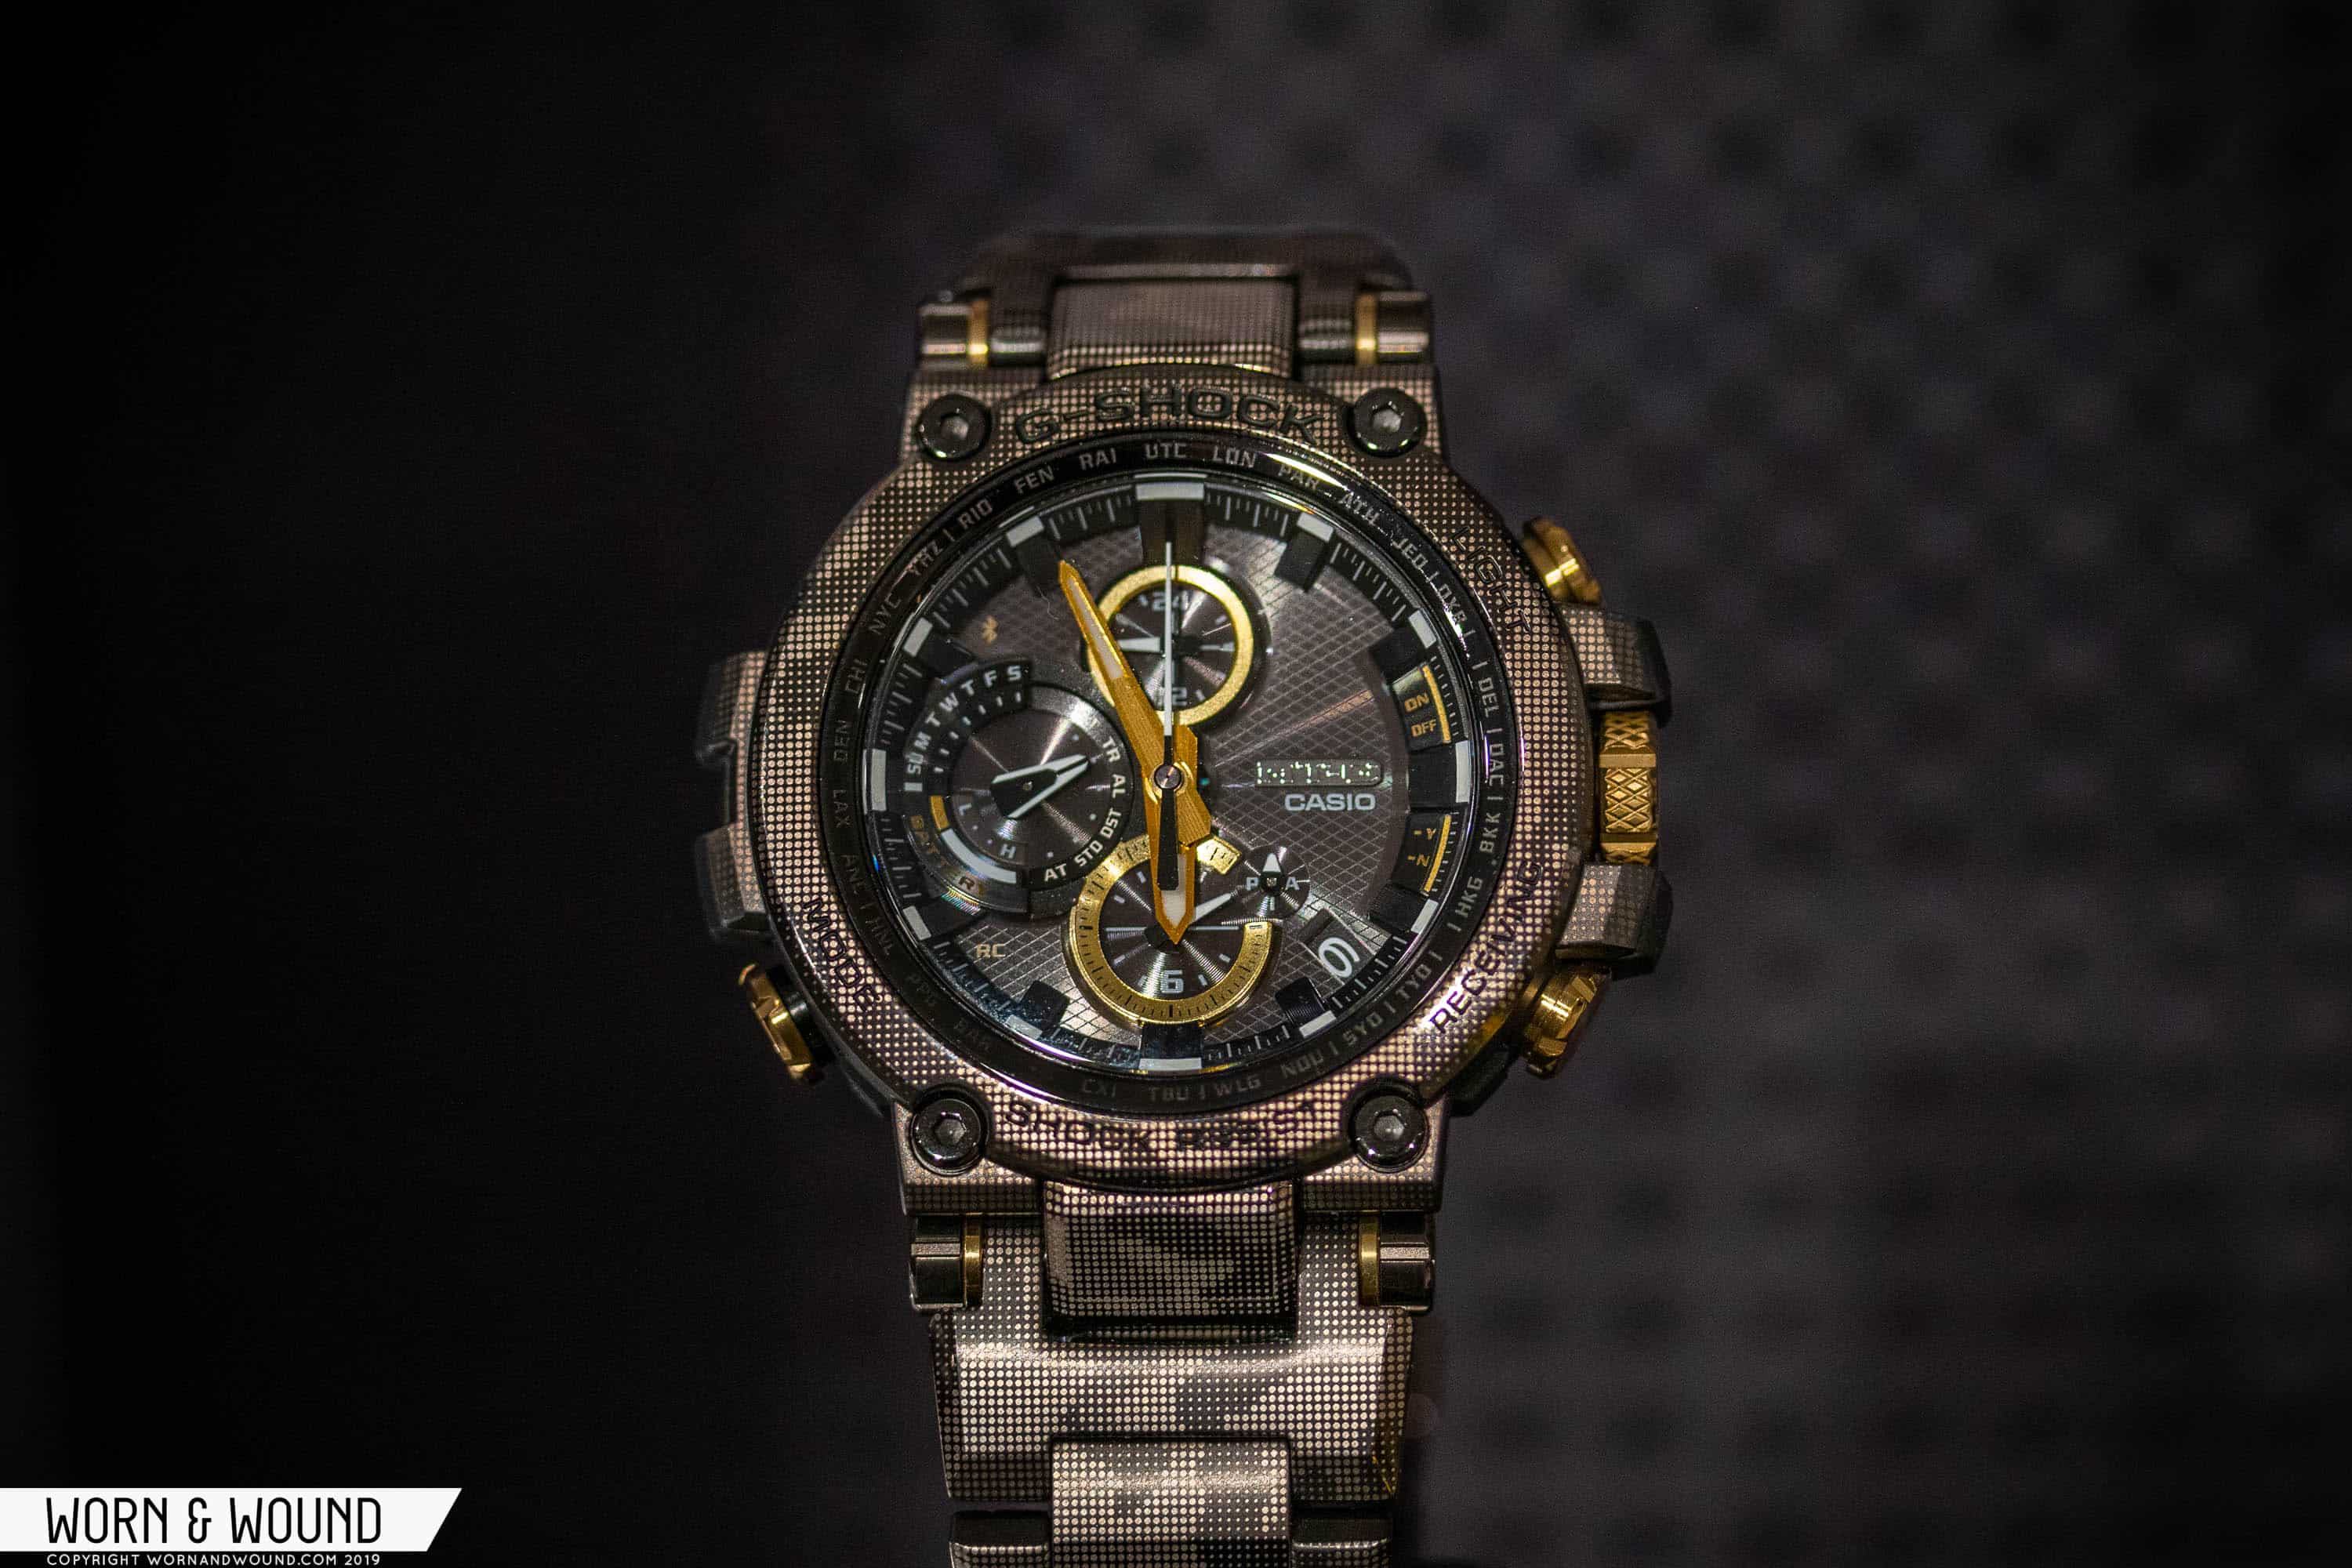 Casio G Shock MTGB1000DCM 1 - First Look at Two Limited Edition G-shocks in a Unique Laser...